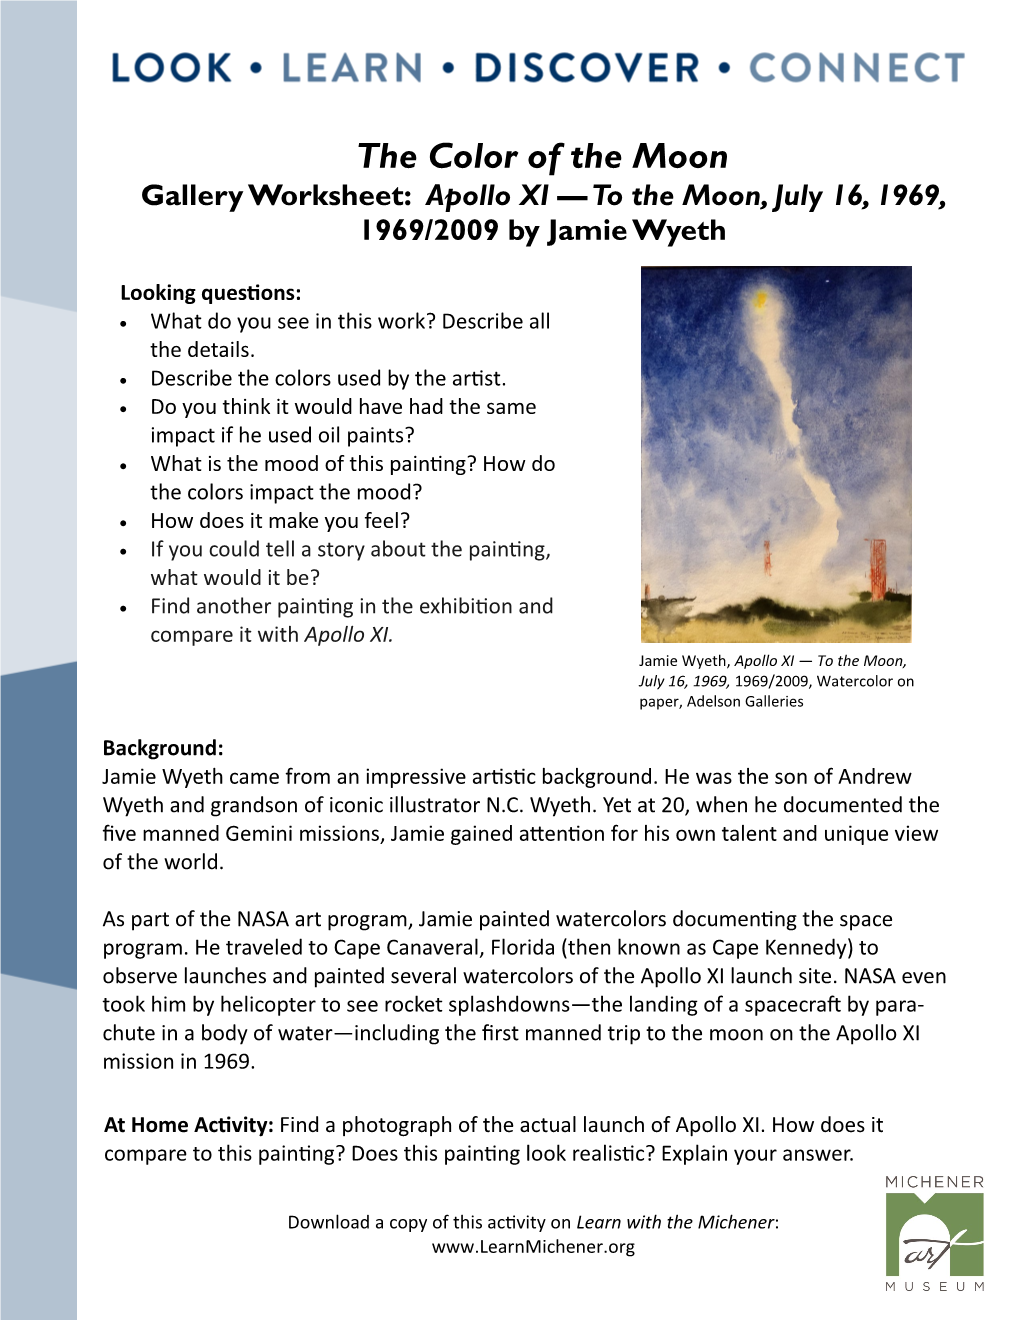 The Color of the Moon Gallery Worksheet: Apollo XI — to the Moon, July 16, 1969, 1969/2009 by Jamie Wyeth